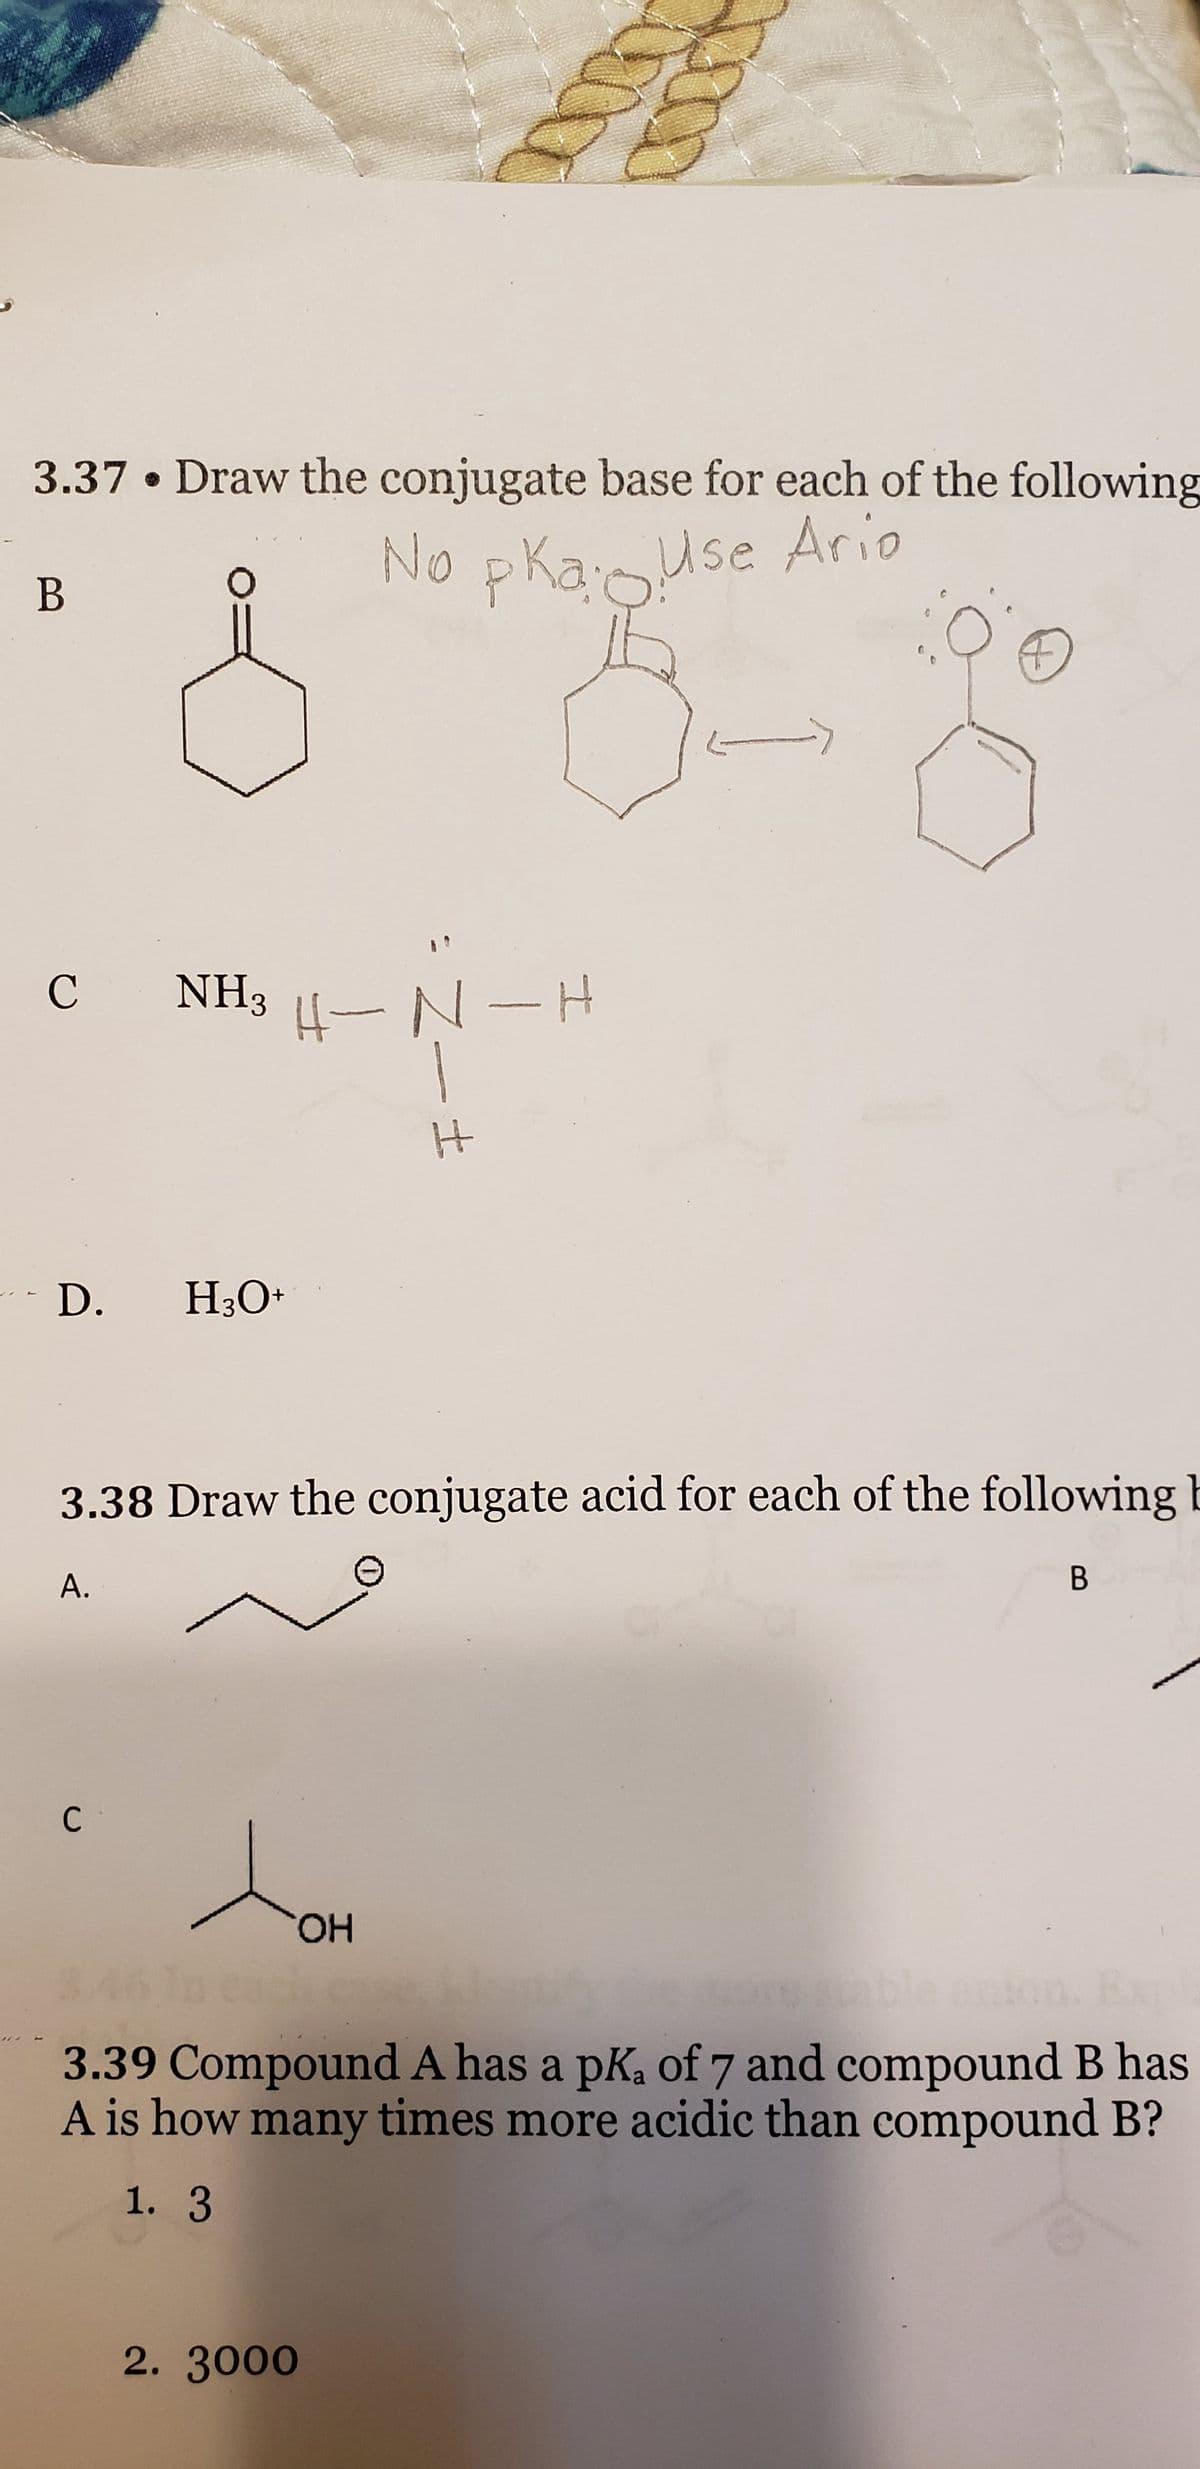 3.37. Draw the conjugate base for each of the following
No pka: Use Ario
B
C NH3 H4-N-H
D. H3O+
A.
C
3.38 Draw the conjugate acid for each of the following b
to
H
OH
2. 3000
->
O
B
3.39 Compound A has a pK₂ of 7 and compound B has
A is how many times more acidic than compound B?
1. 3